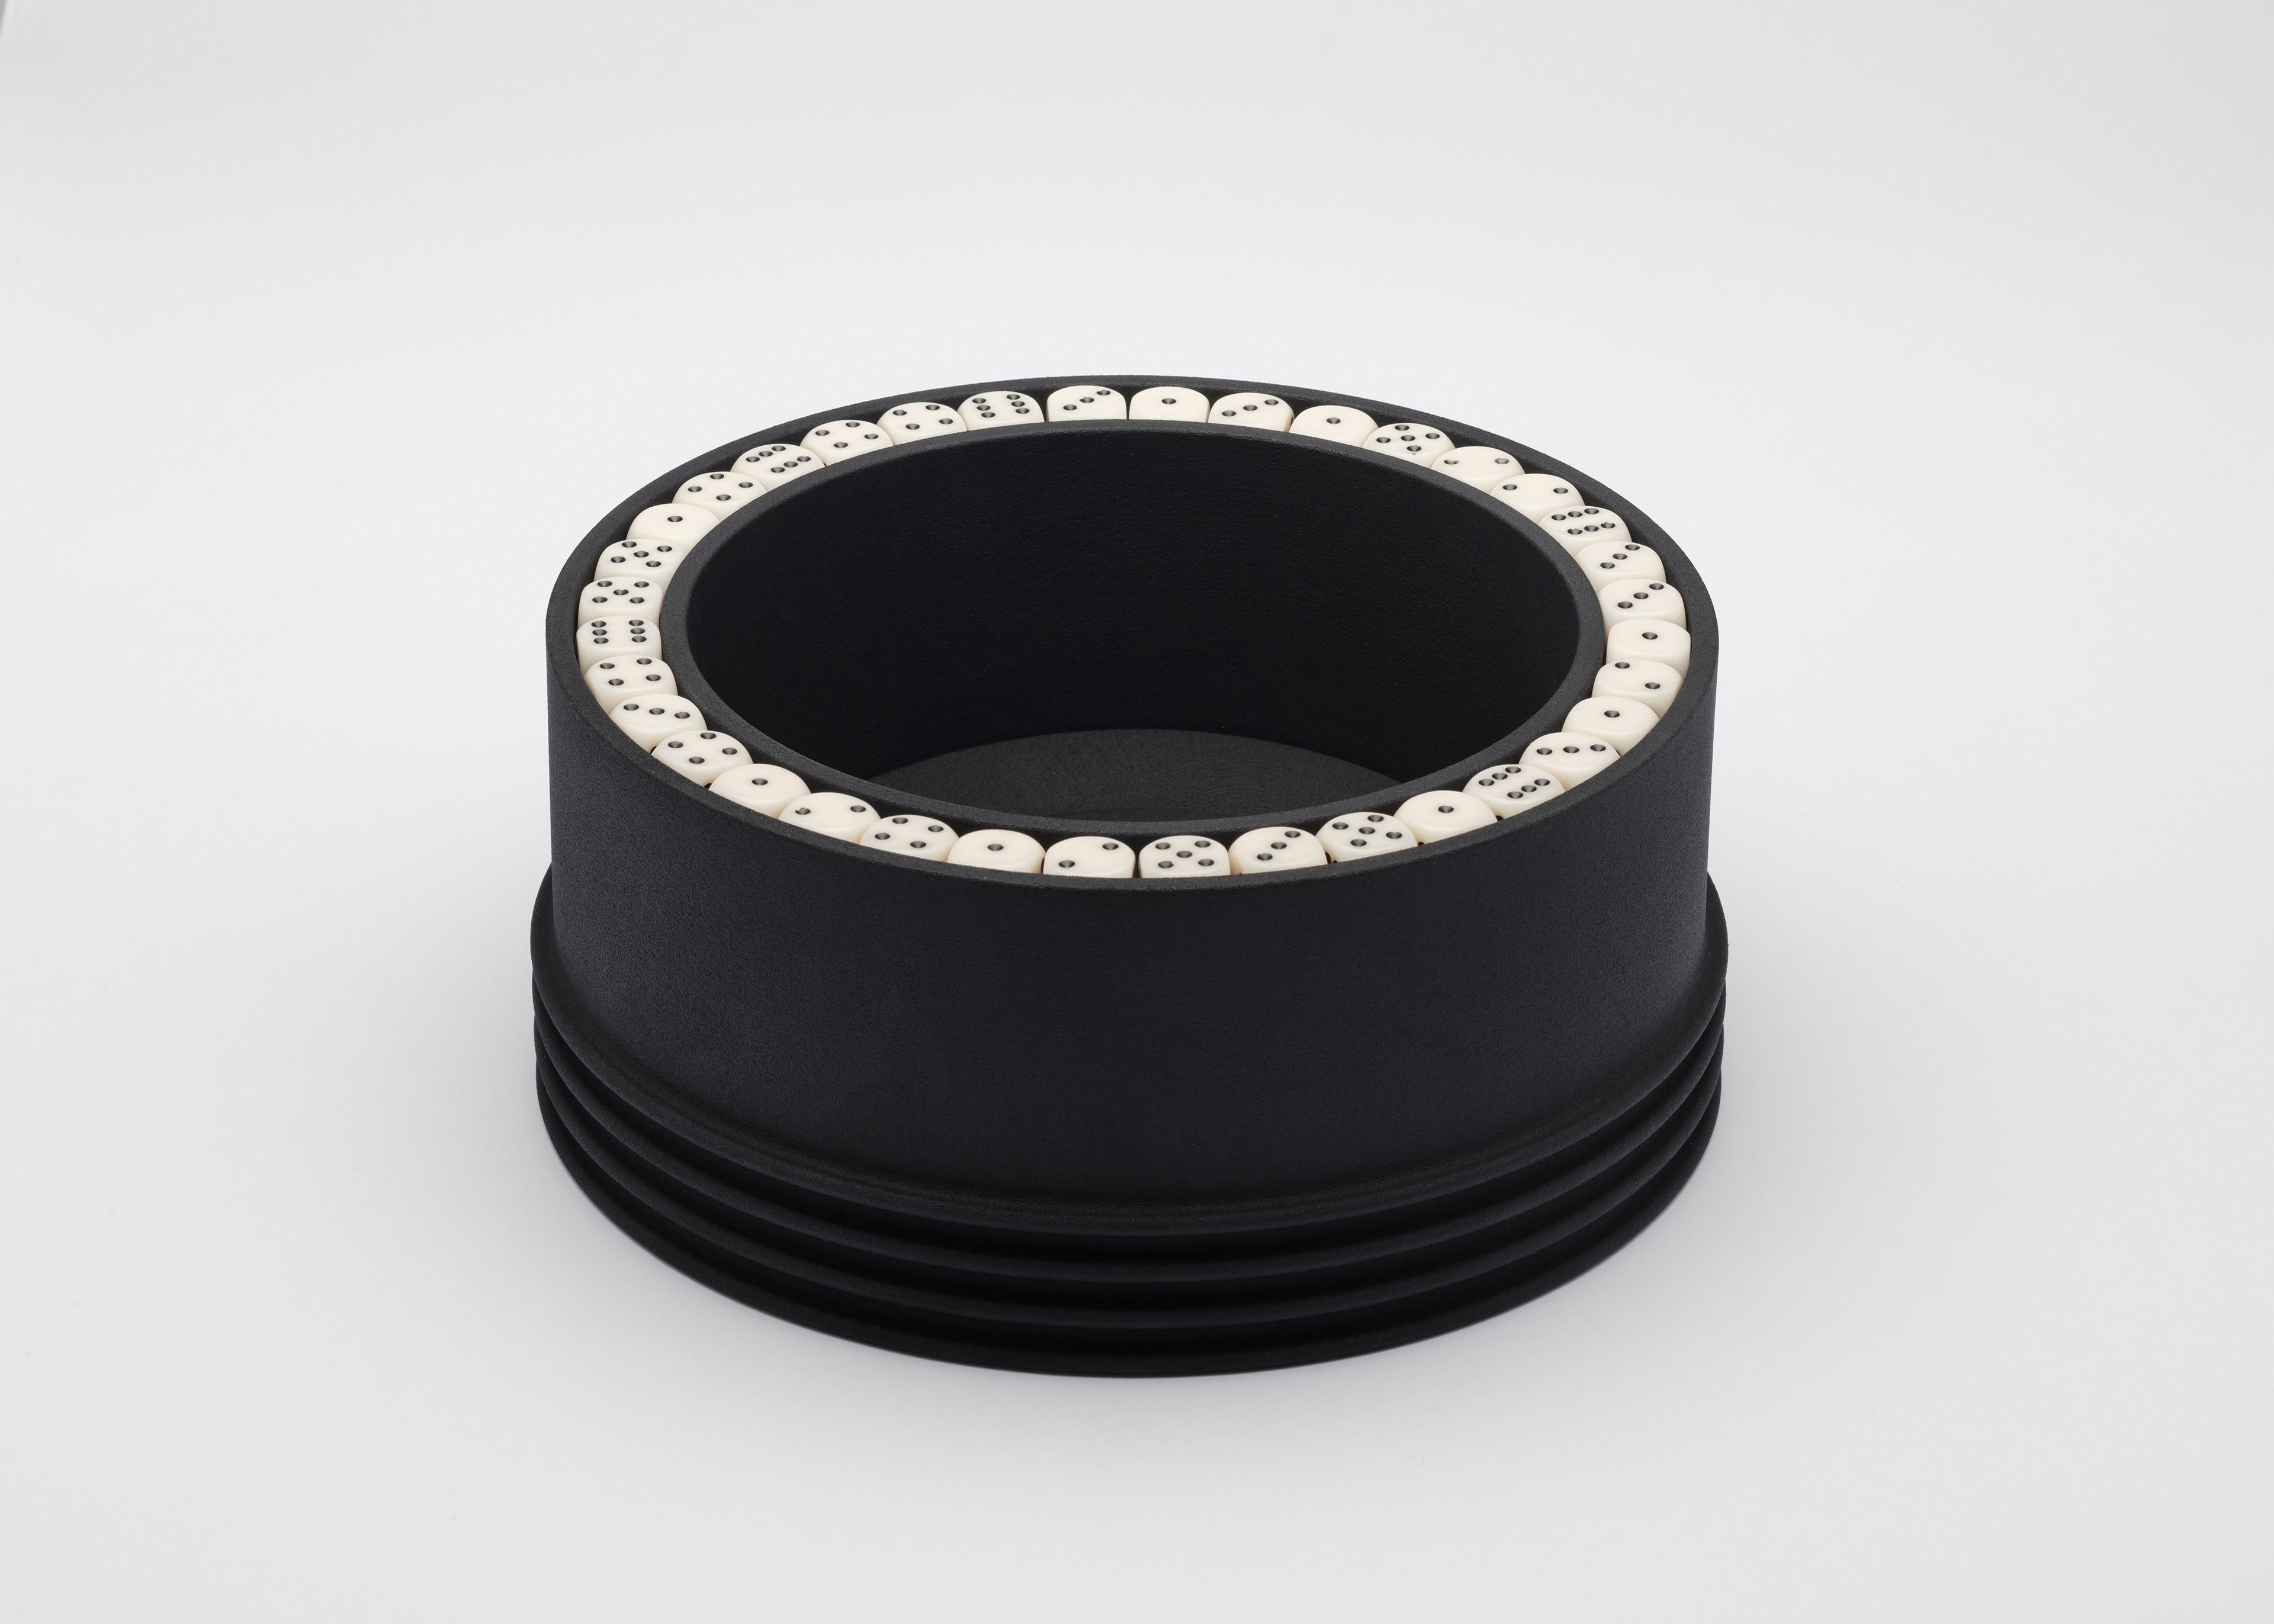 Known as the O-bowl, this contemporary 3D printed satin black PA12 Nylon bowl decorated with dice is a great decorative bowl and centrepiece that can also be used as a gaming tray.
This intricate object of unique design by Alexandre Arrechea was